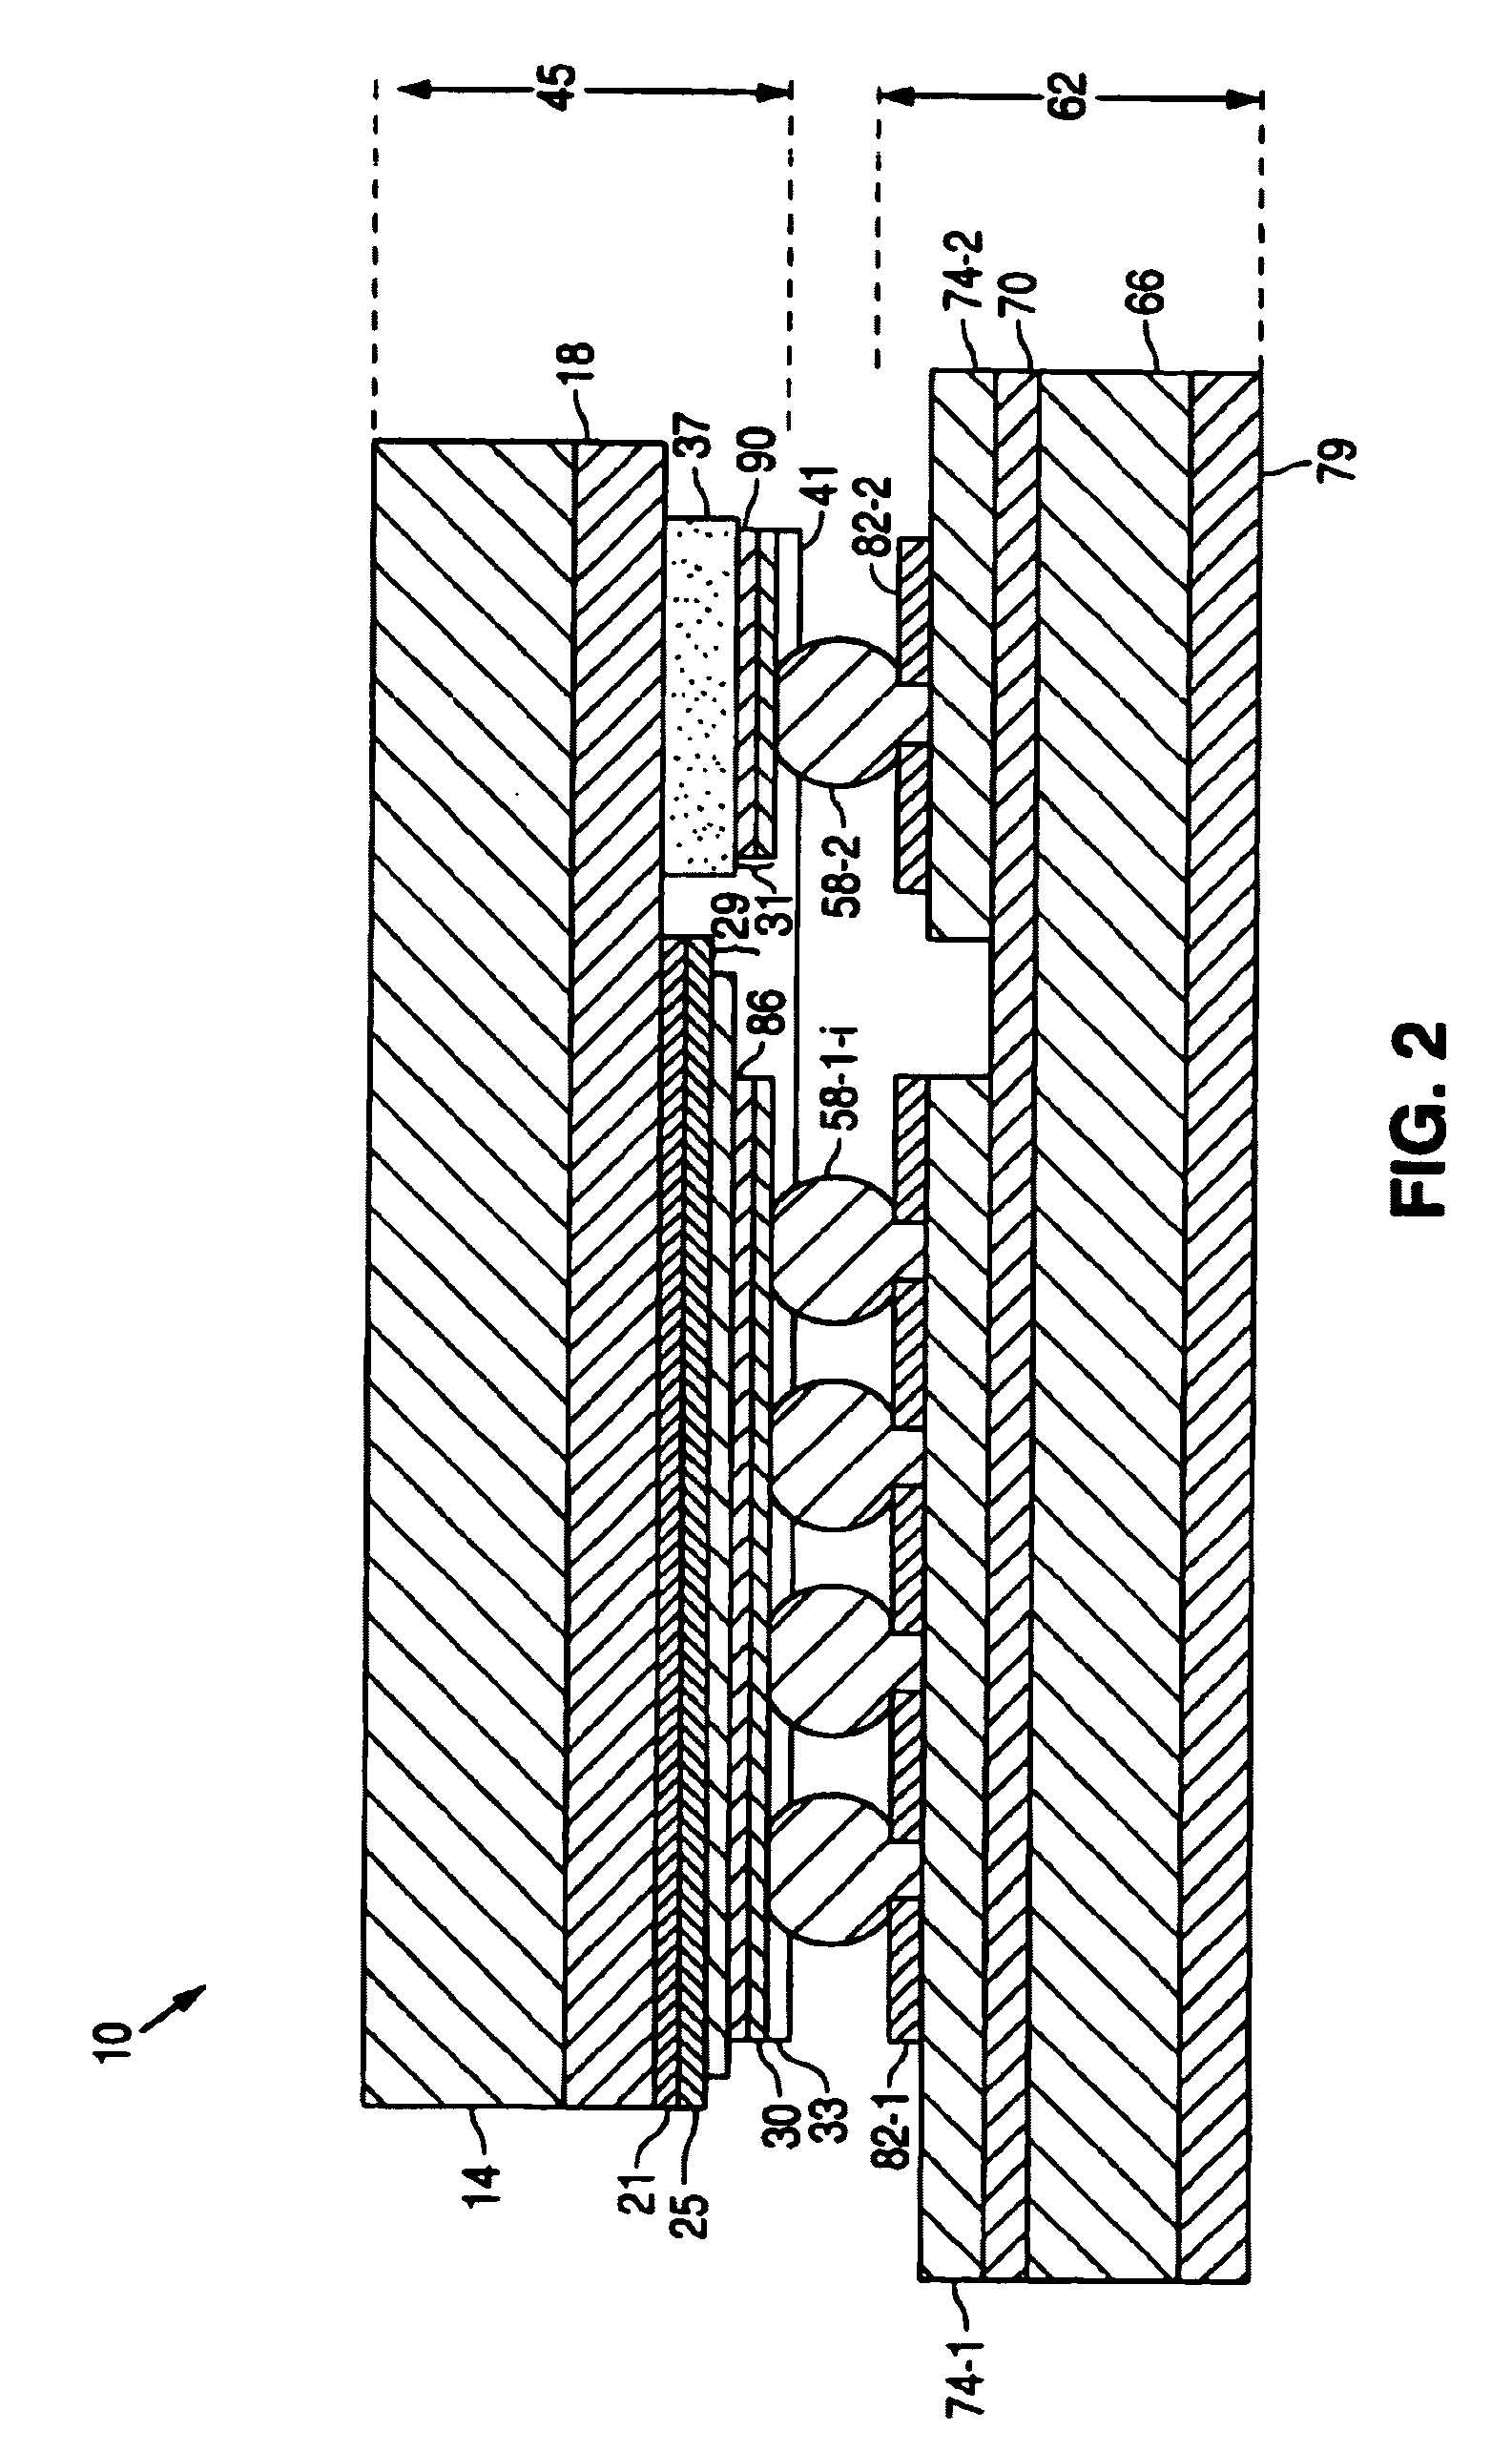 High-powered light emitting device with improved thermal properties